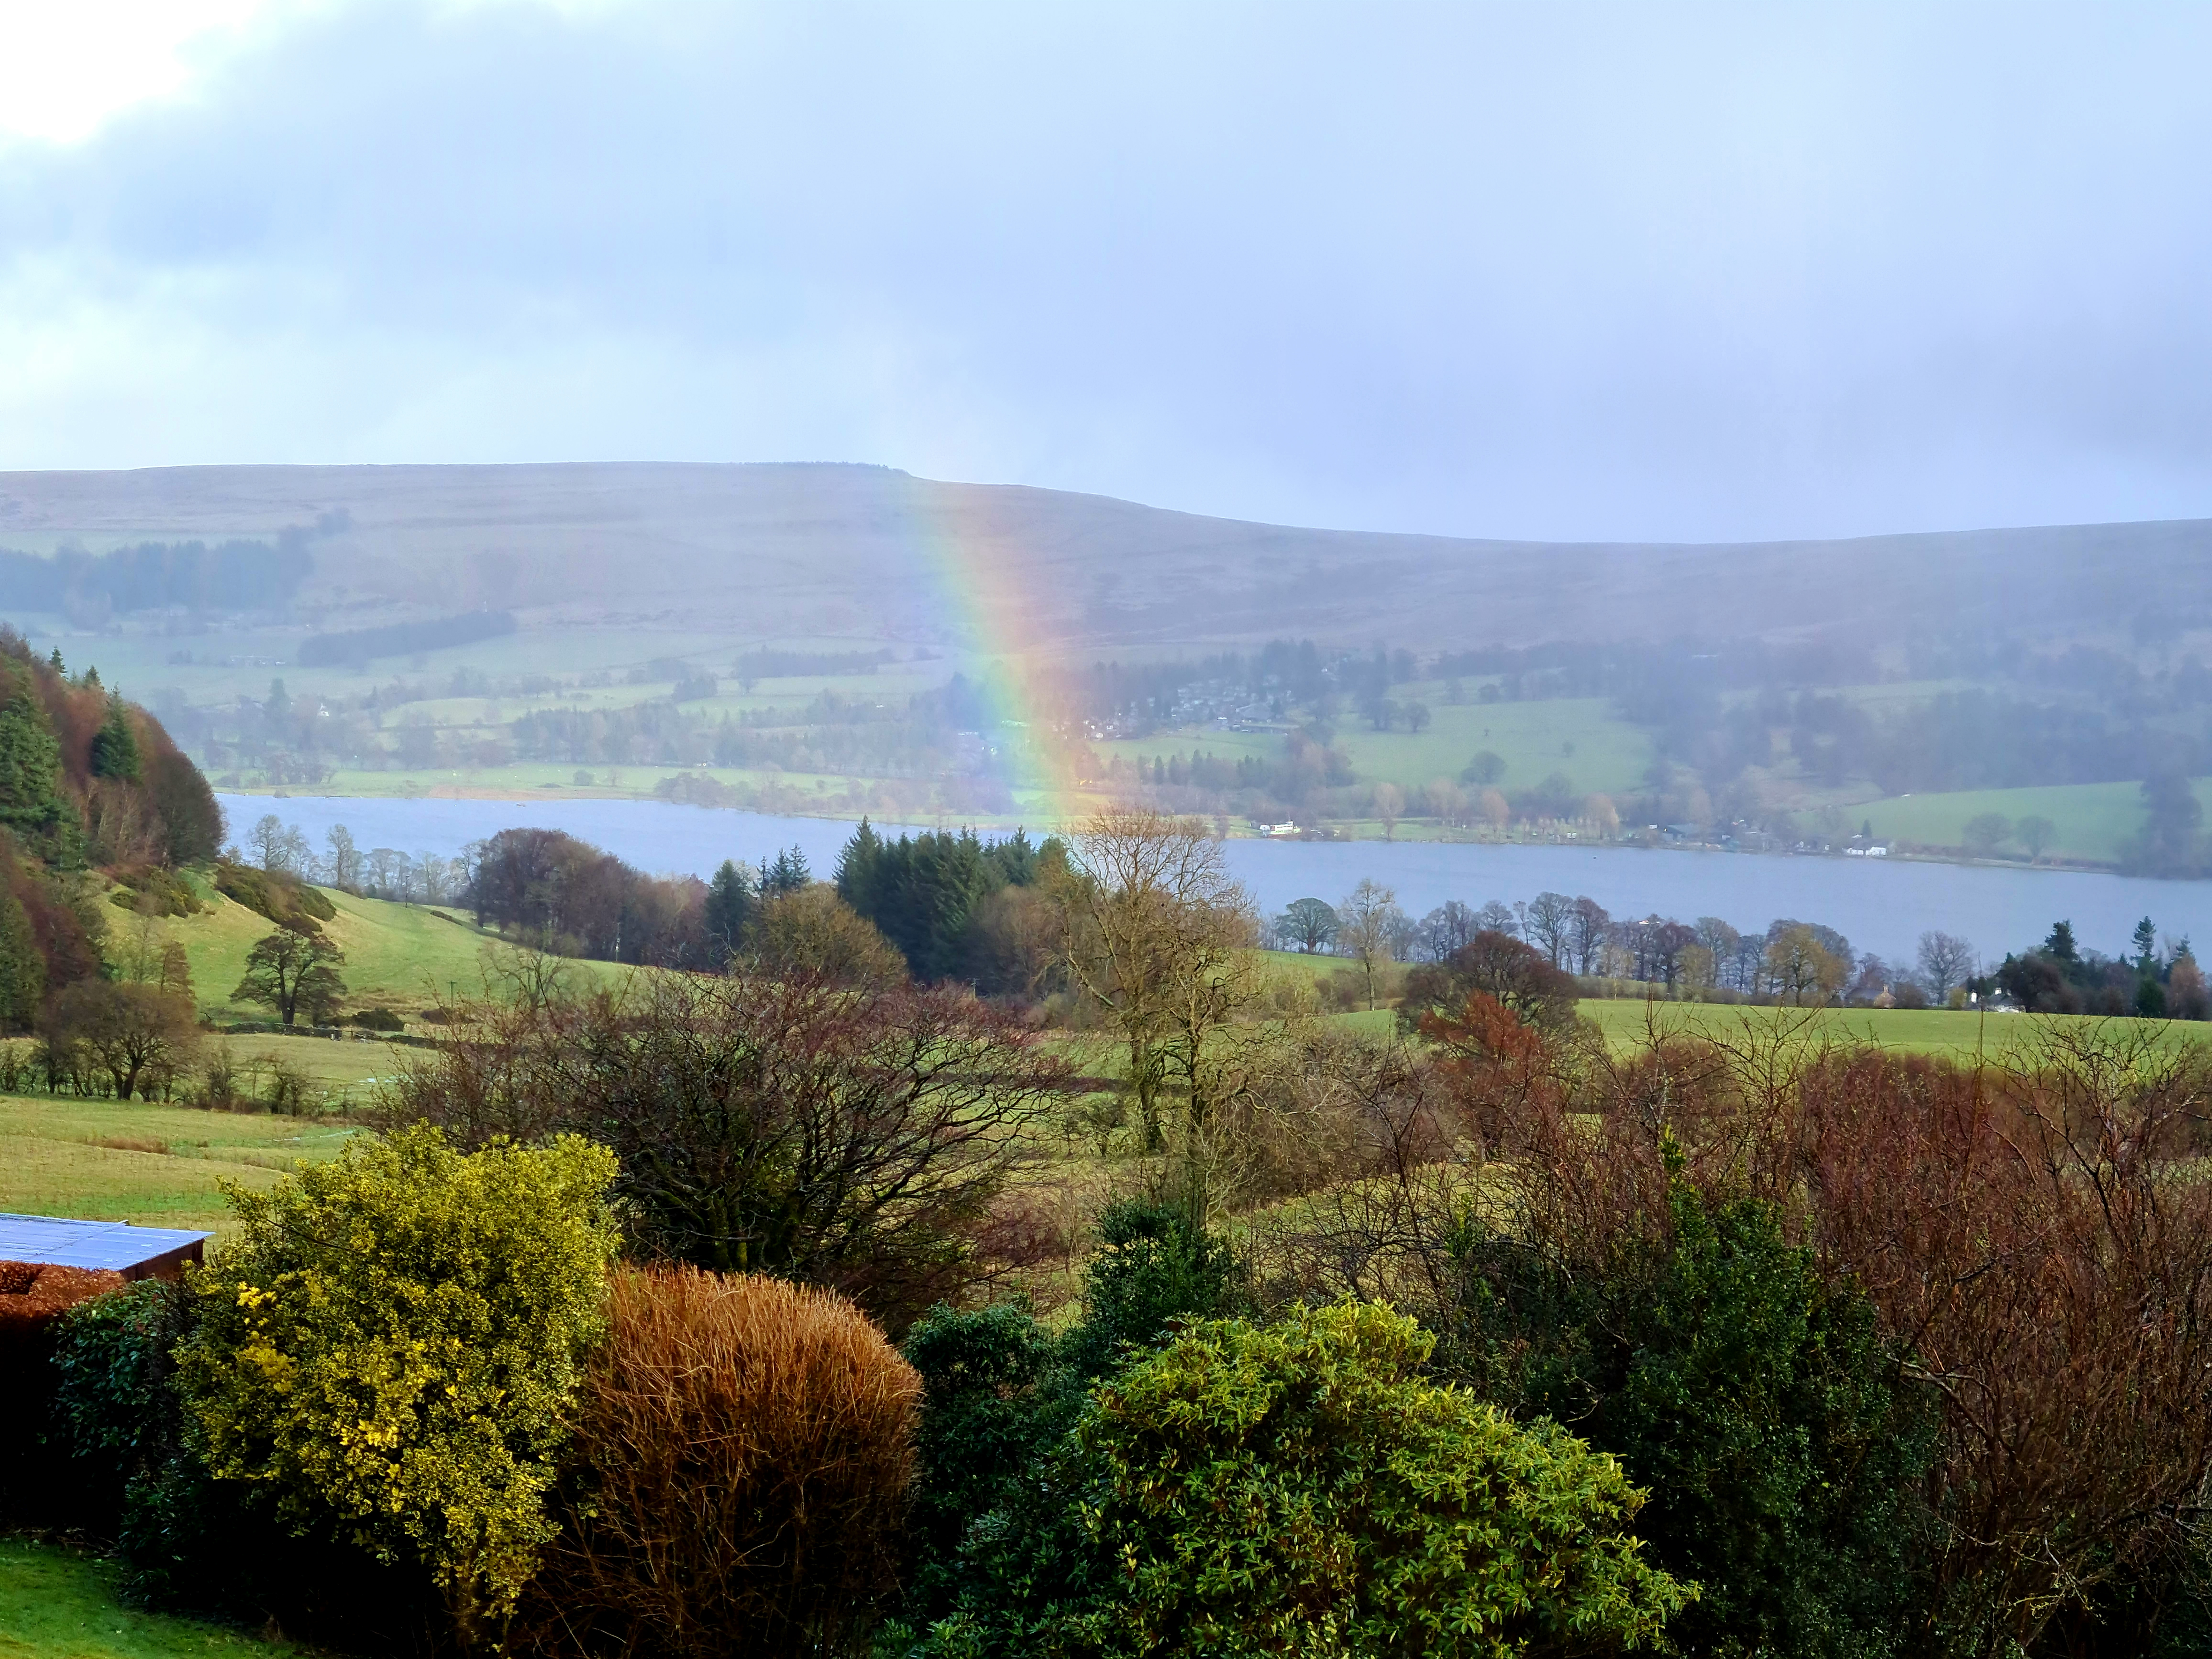 A rainbow appears in the Lake District